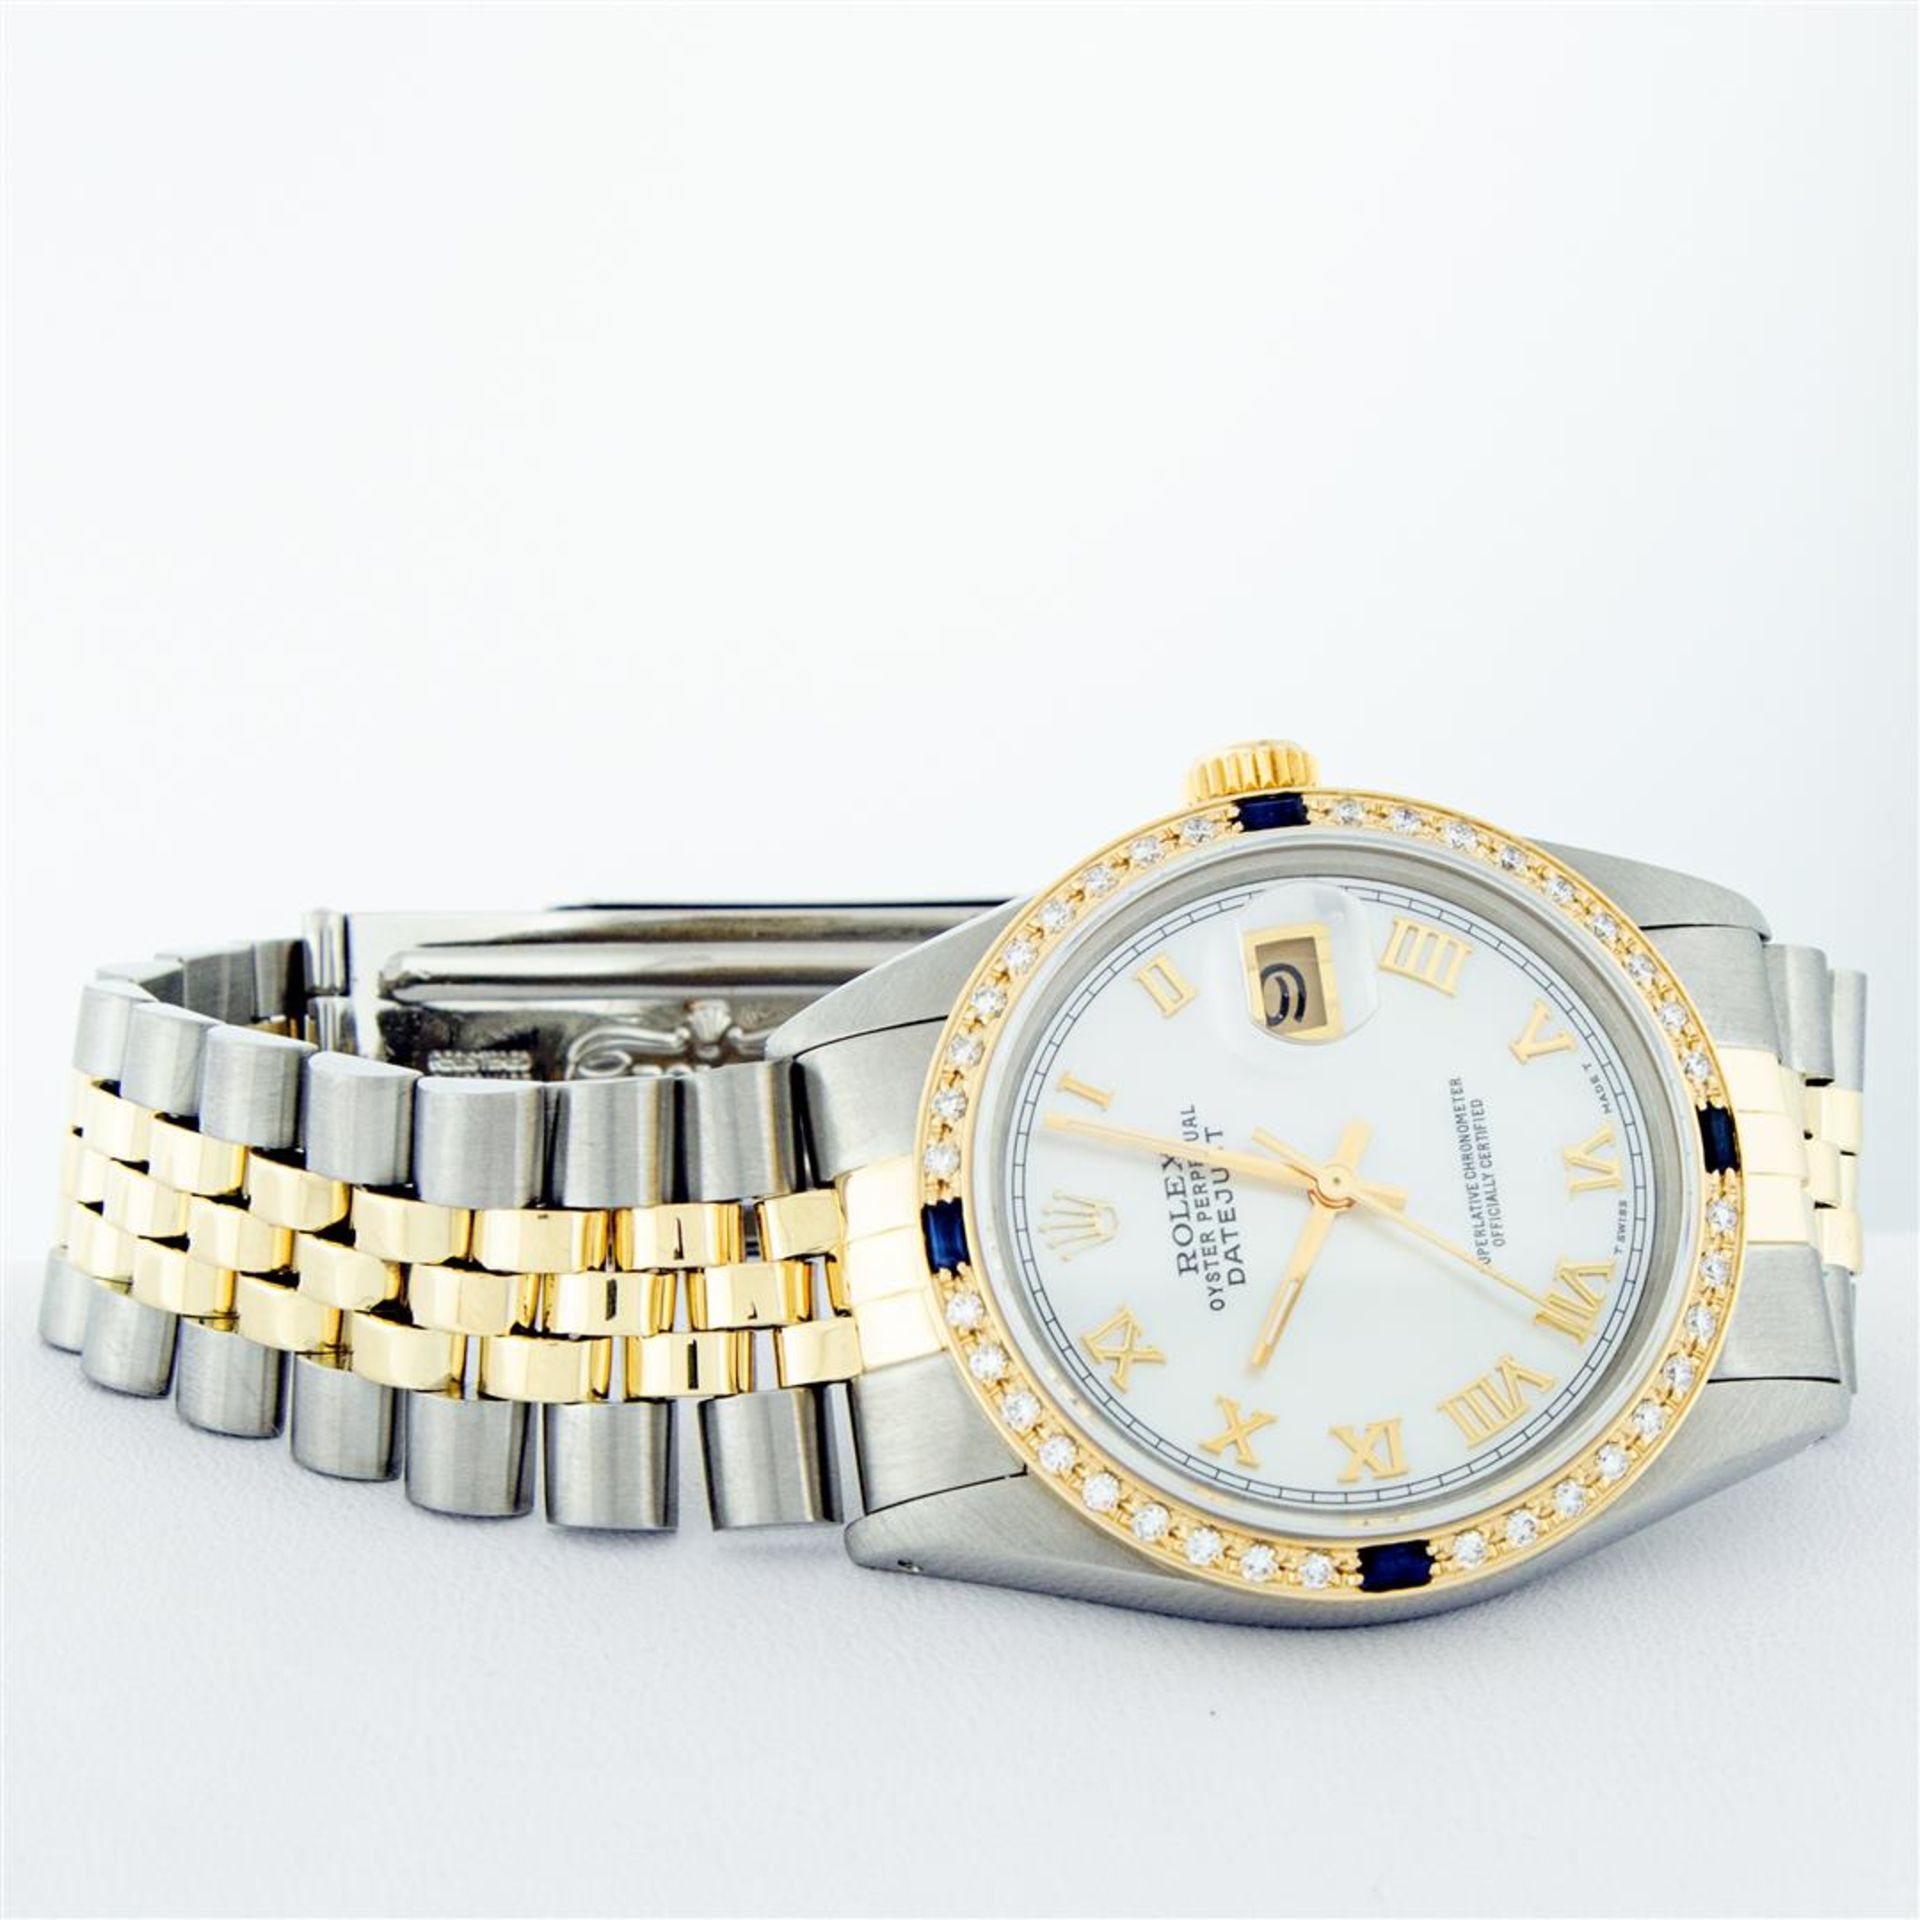 Rolex Mens 2 Tone Mother Of Pearl Diamond & Sapphire 36MM Datejust Wristwatch - Image 5 of 9